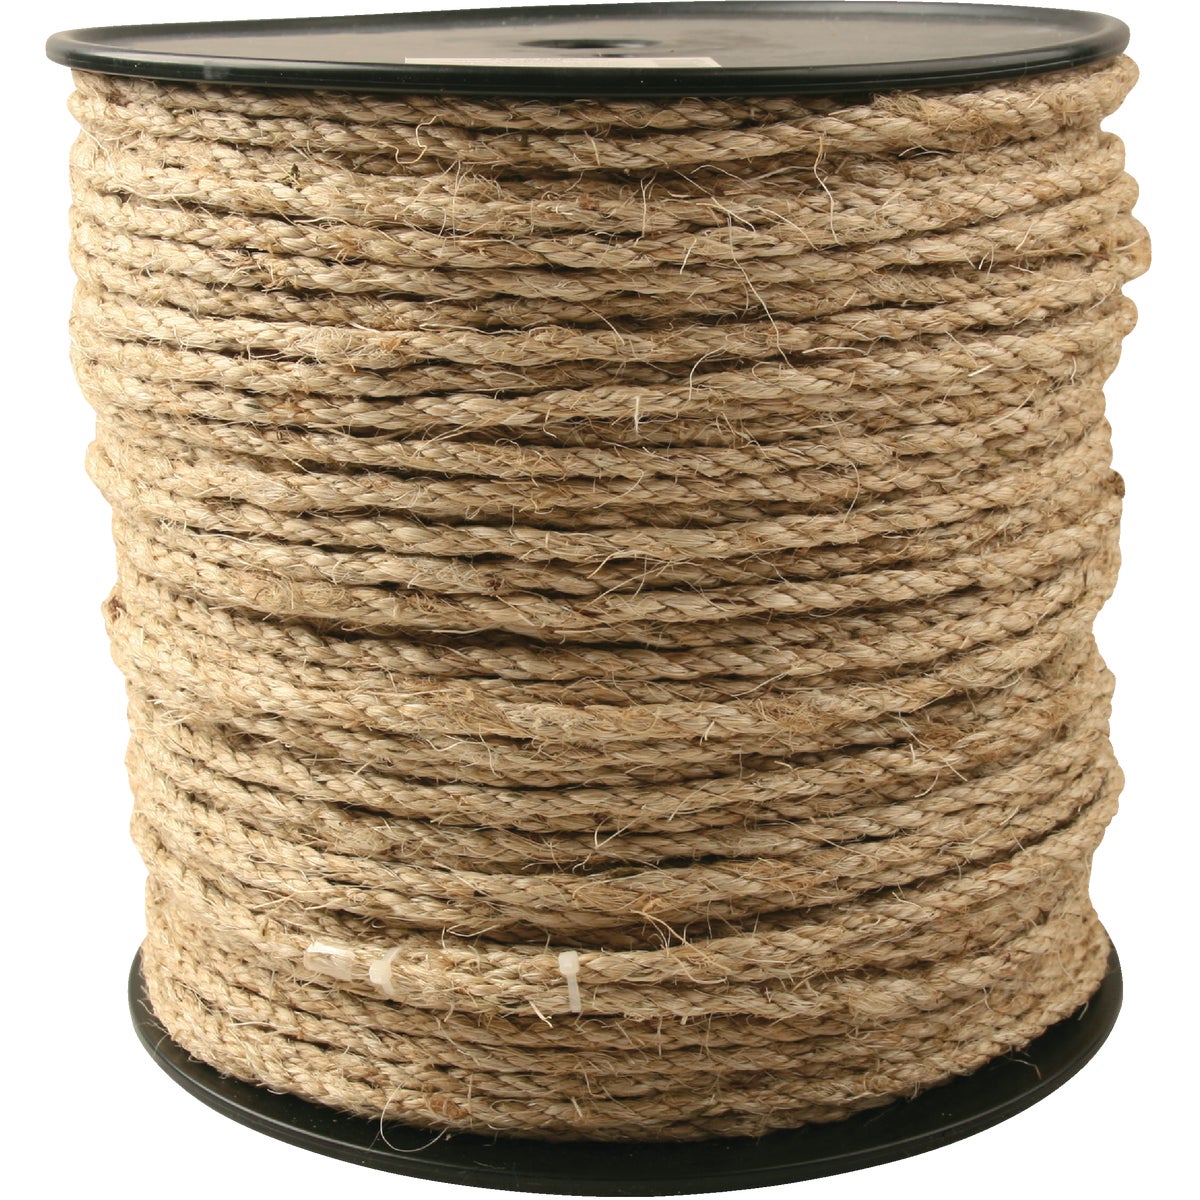 Item 748285, Twisted sisal bulk rope on a convenient spool for distribution.